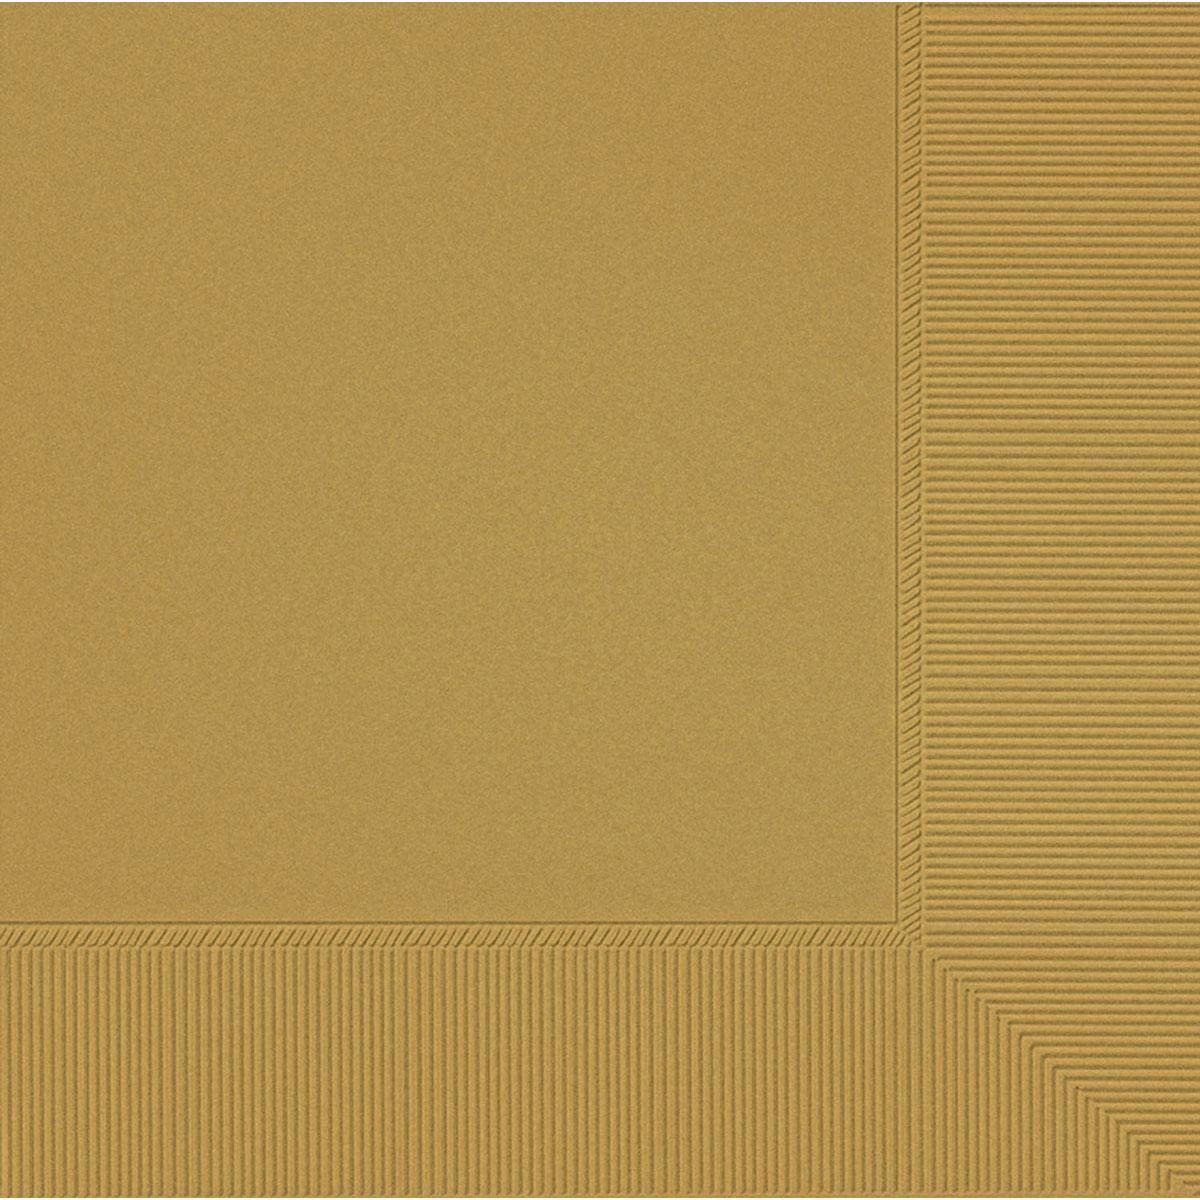 Pack of 20 Gold Beverage Napkins 2ply 23cm by Amscan 50220-19 available here at Karnival Costumes online party shop